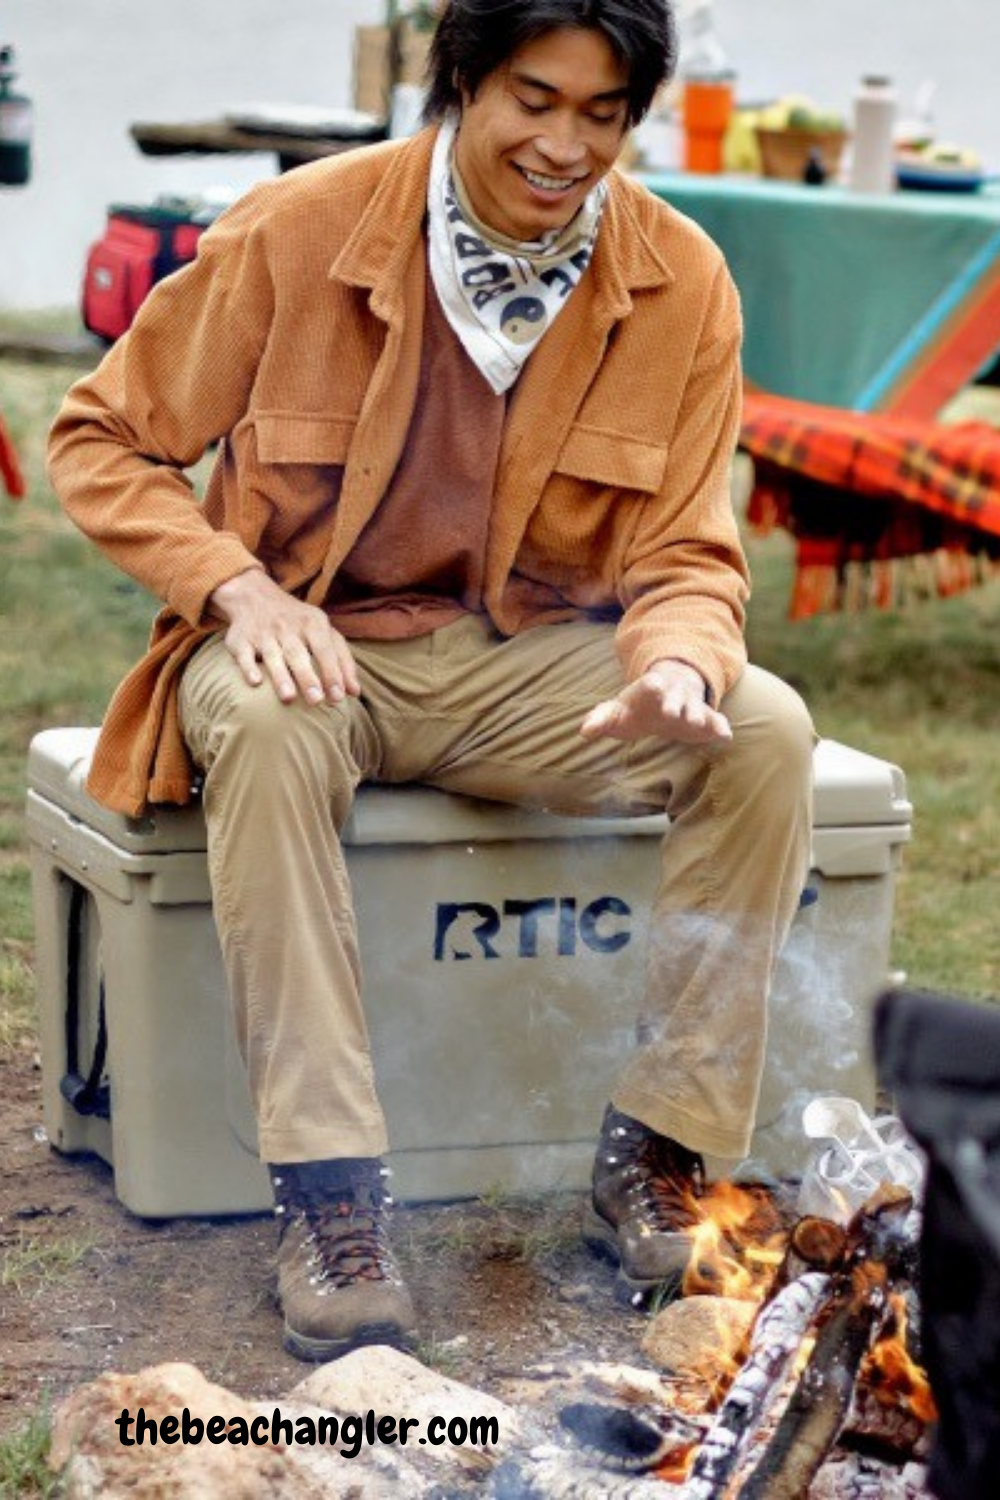 Man sitting on his RTIC 65 Hard Cooler by the campfire